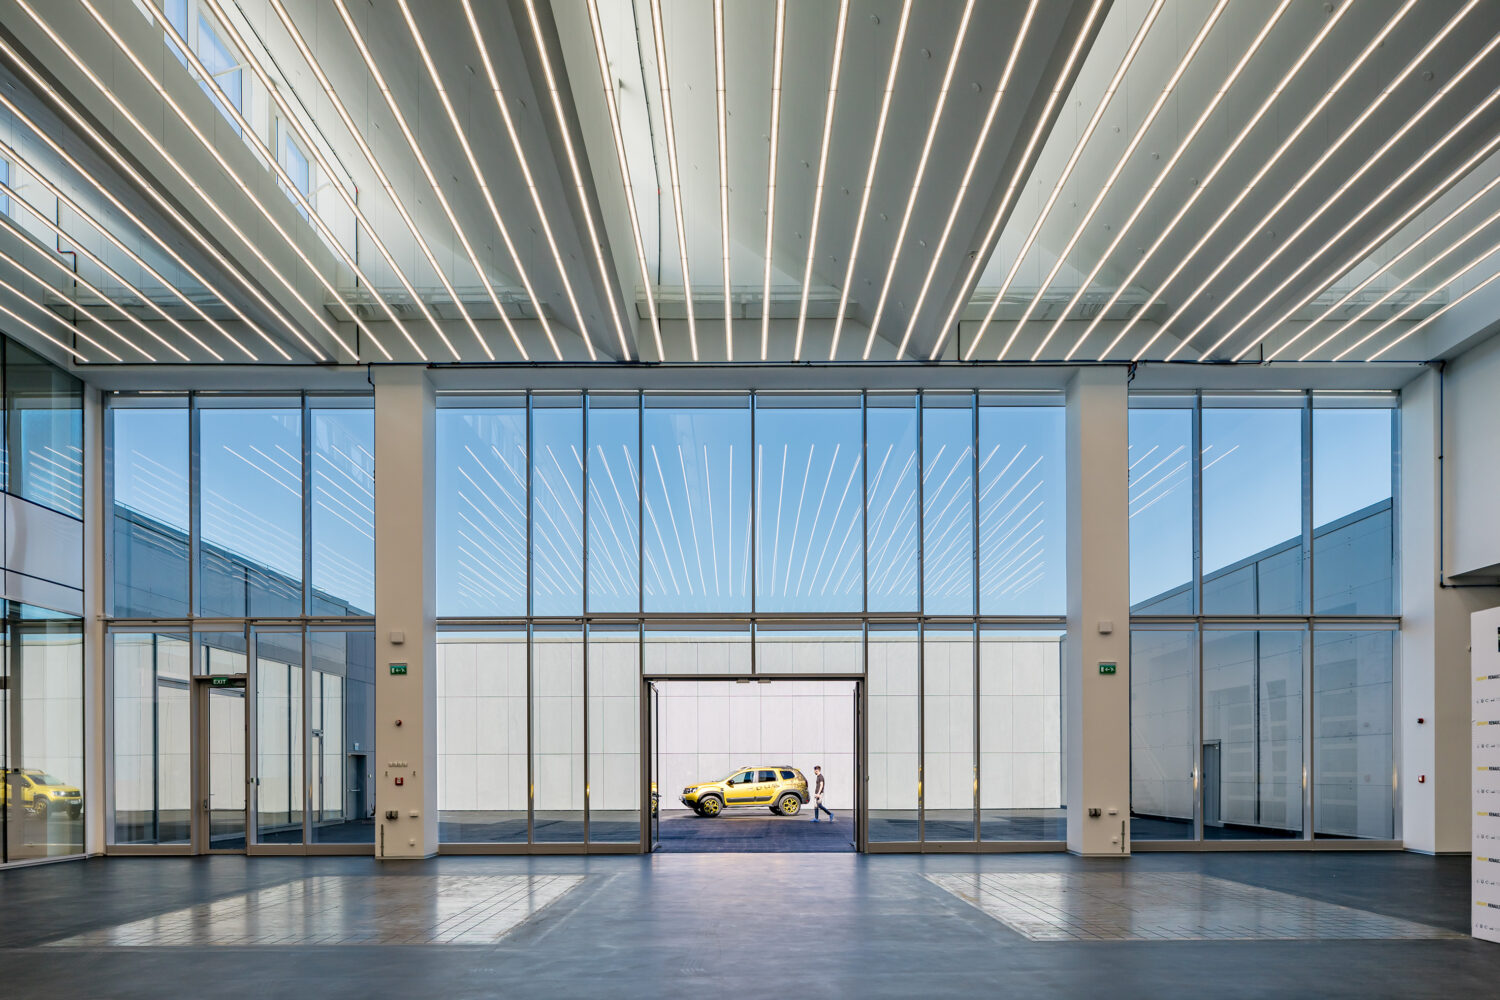 2019 - The new Renault Bucharest Connected centre